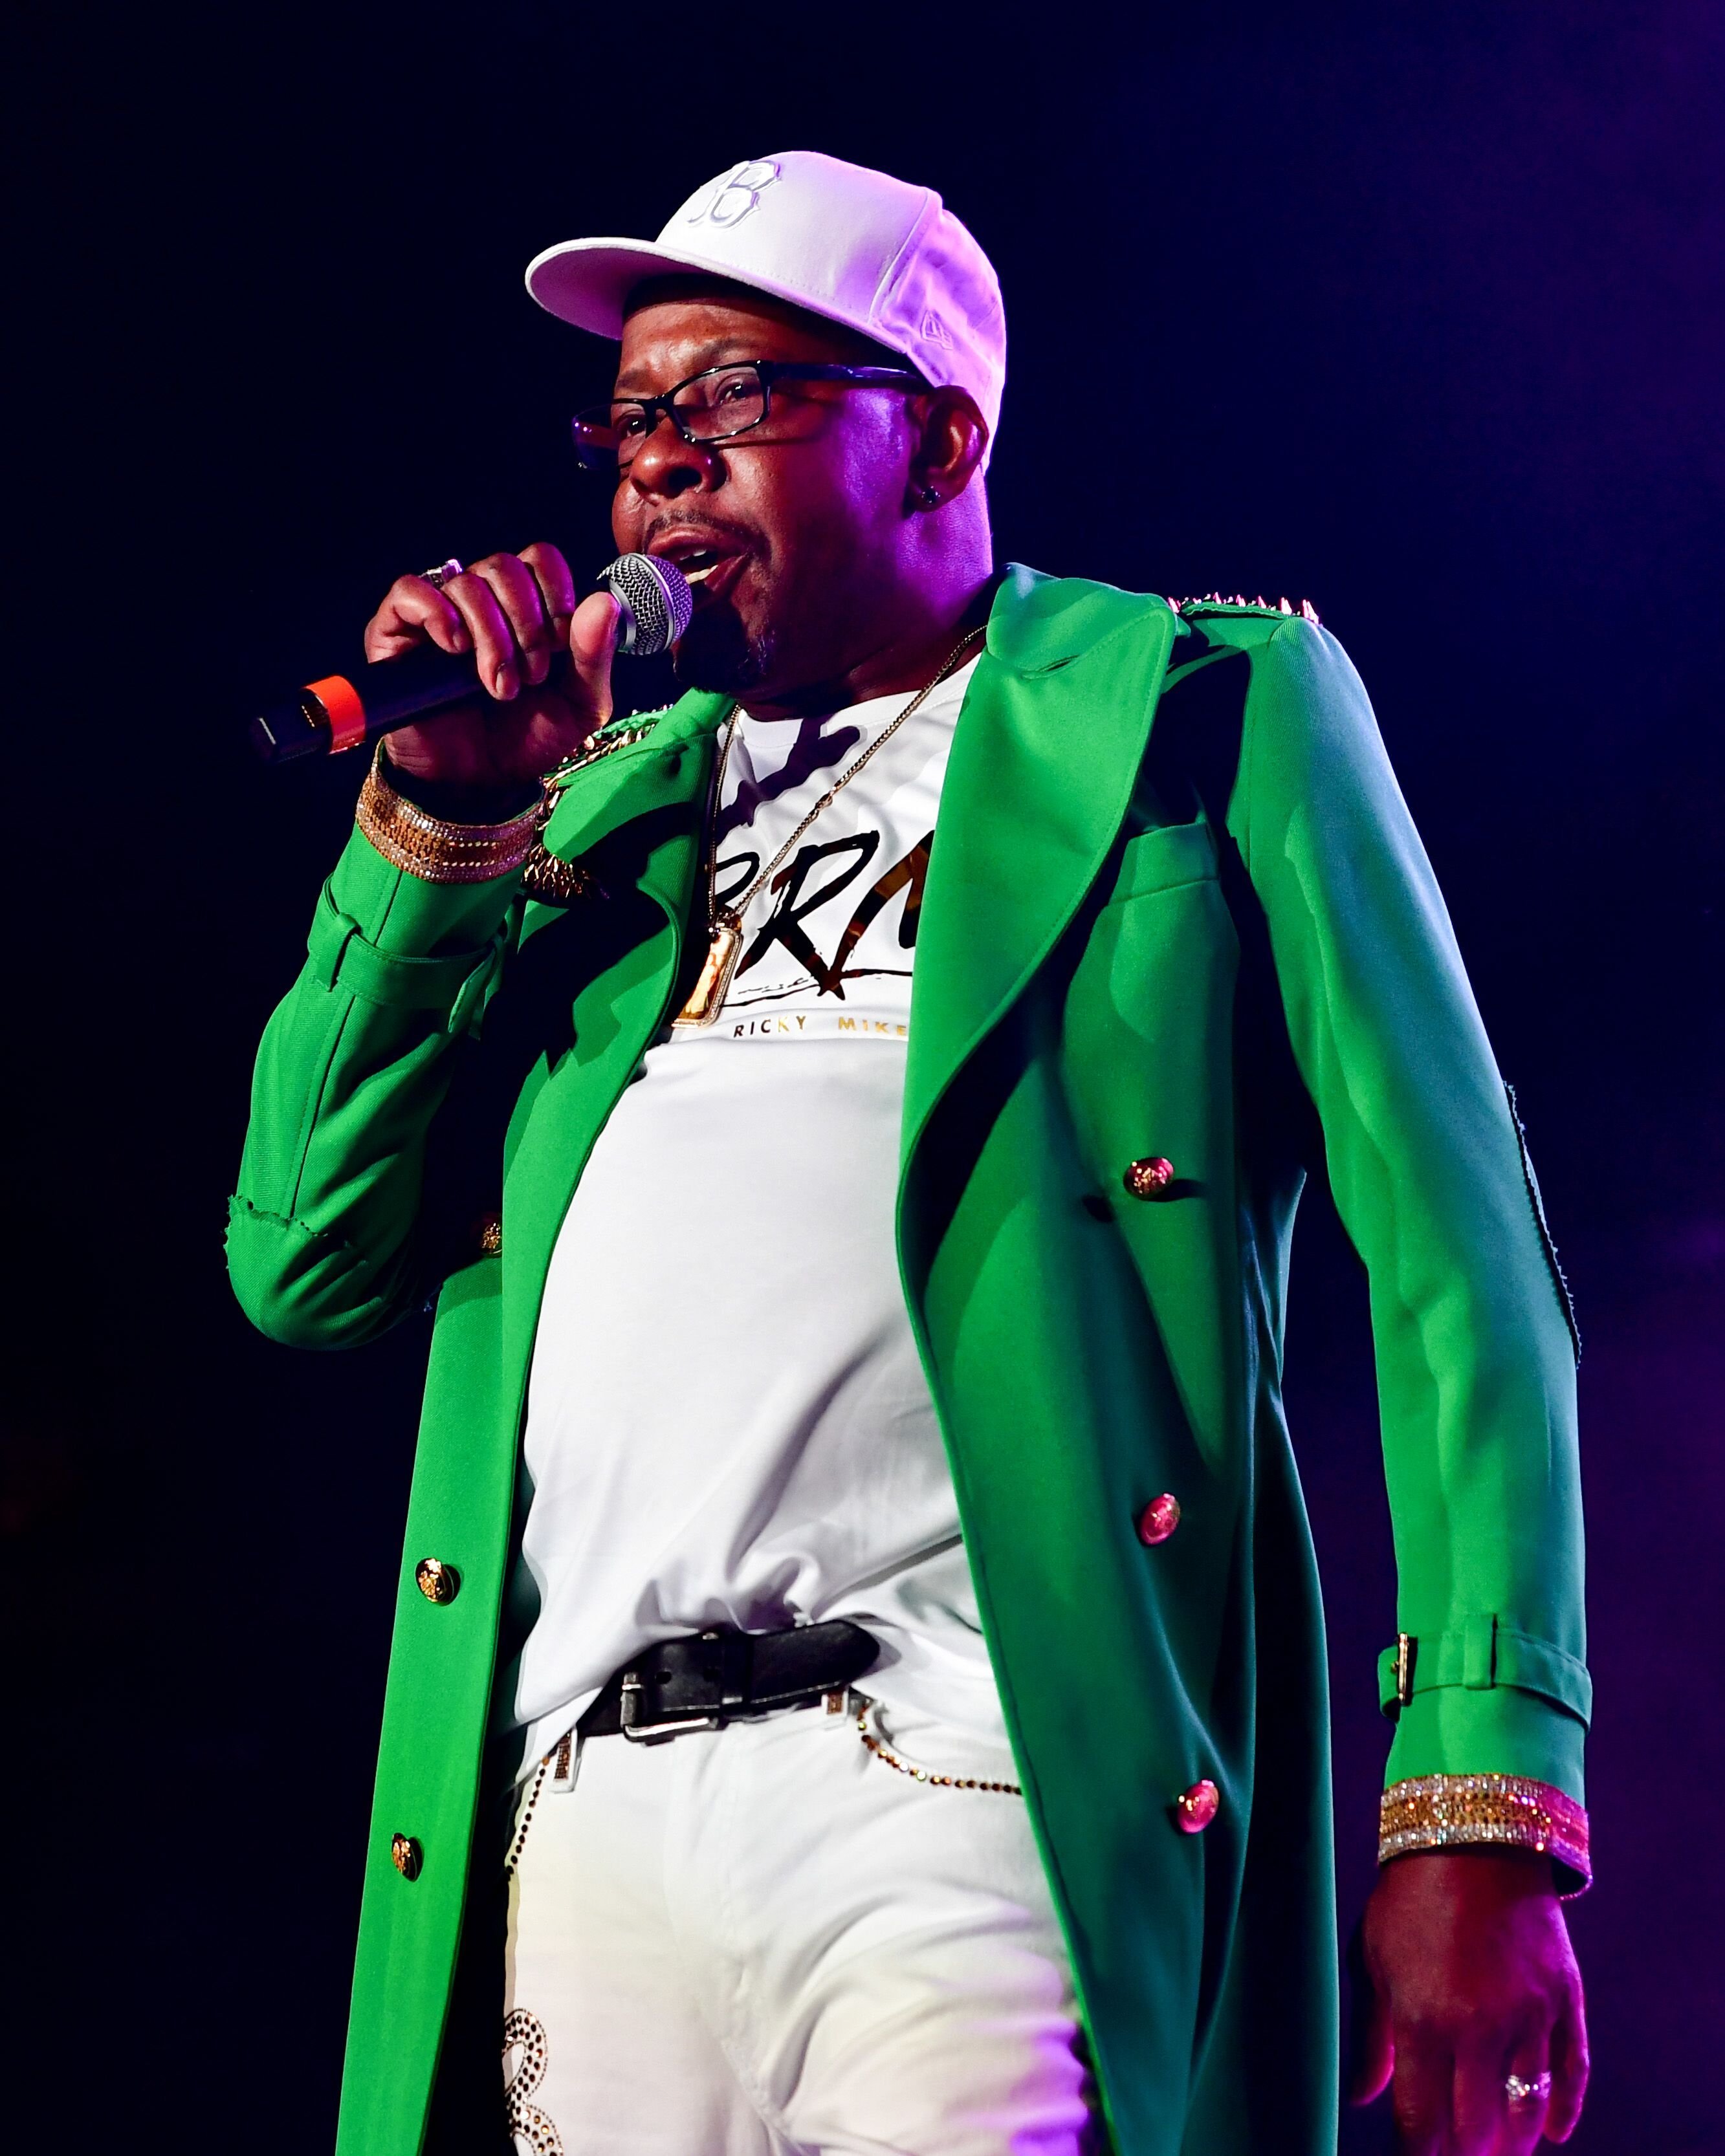 Bobby Brown of RMBM performs during the 2019 ESSENCE Festival at the Mercedes-Benz Superdome | Photo: Getty Images